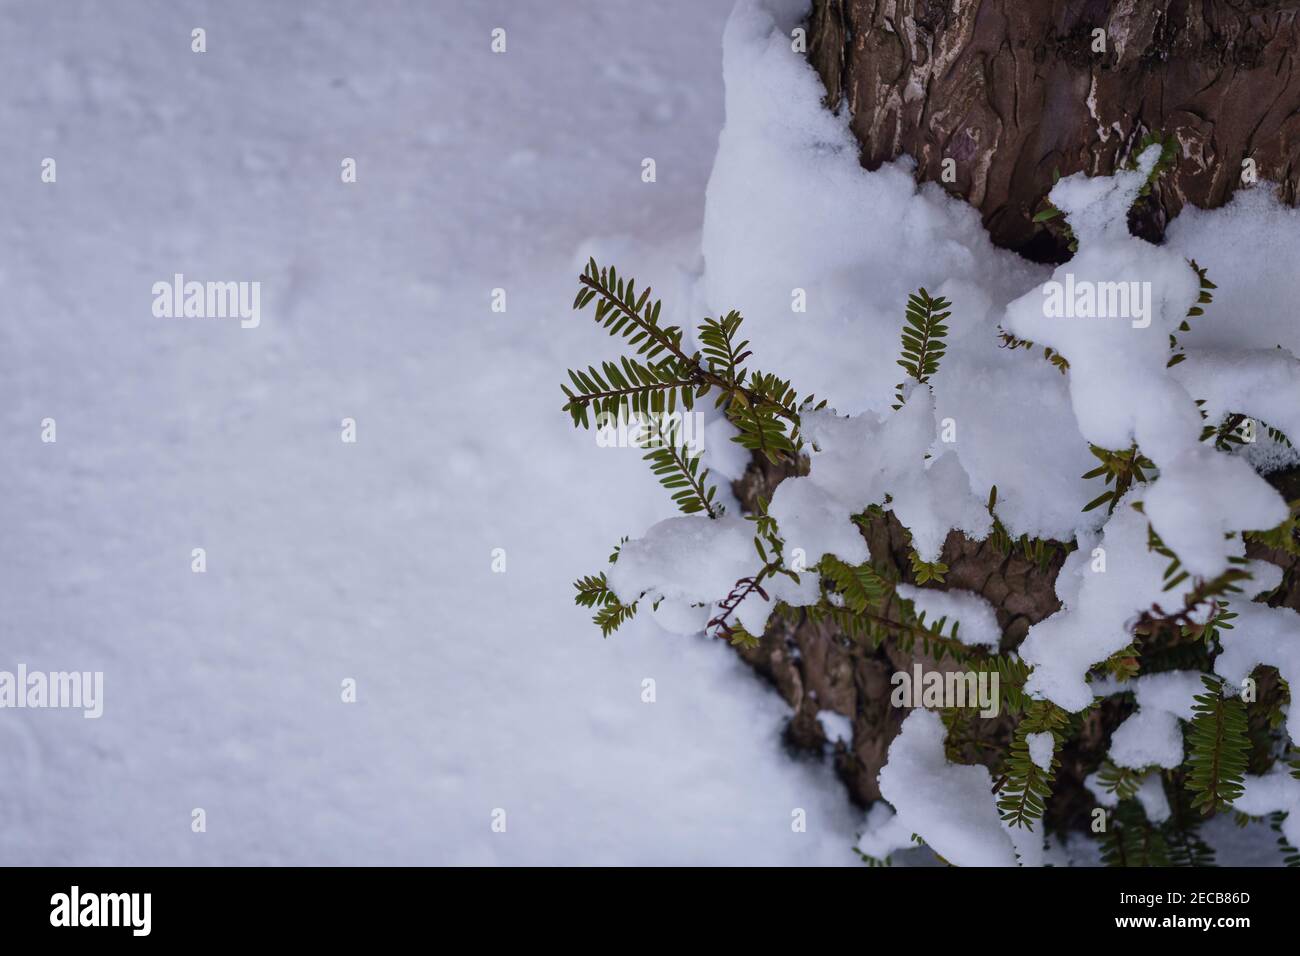 snow on fir branches on a tree trunk Stock Photo